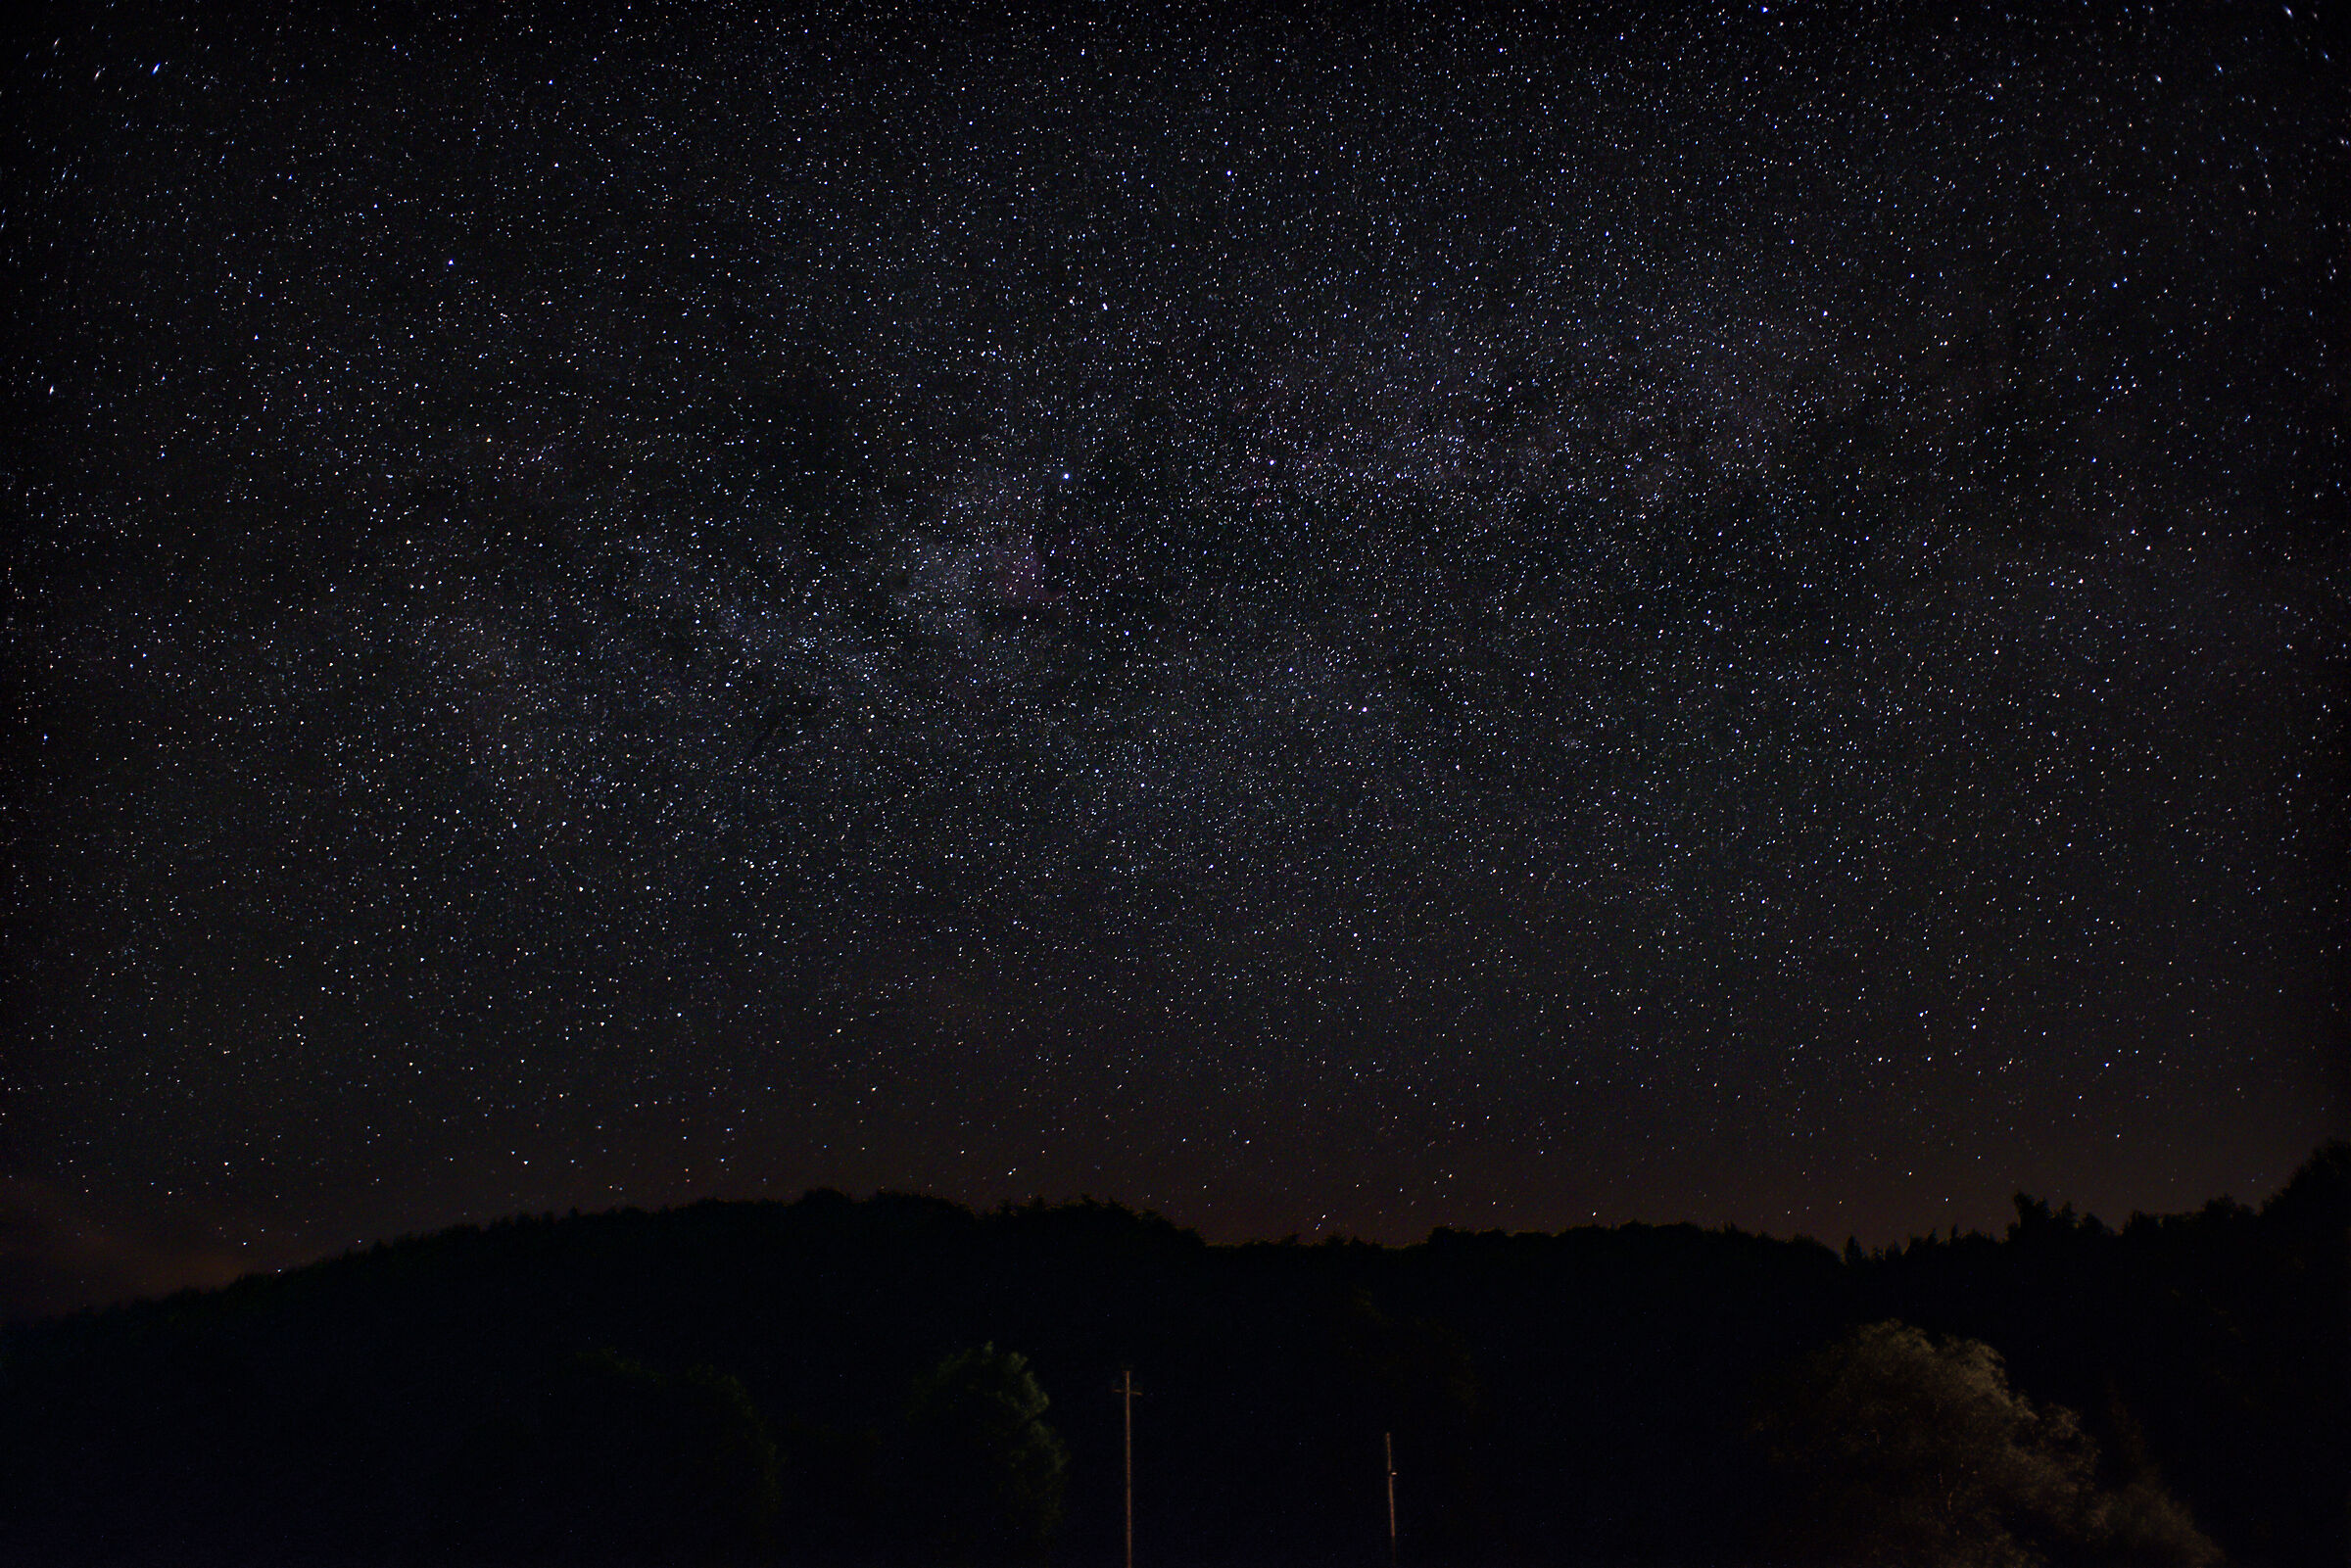 First attempt to capture the Milky Way...